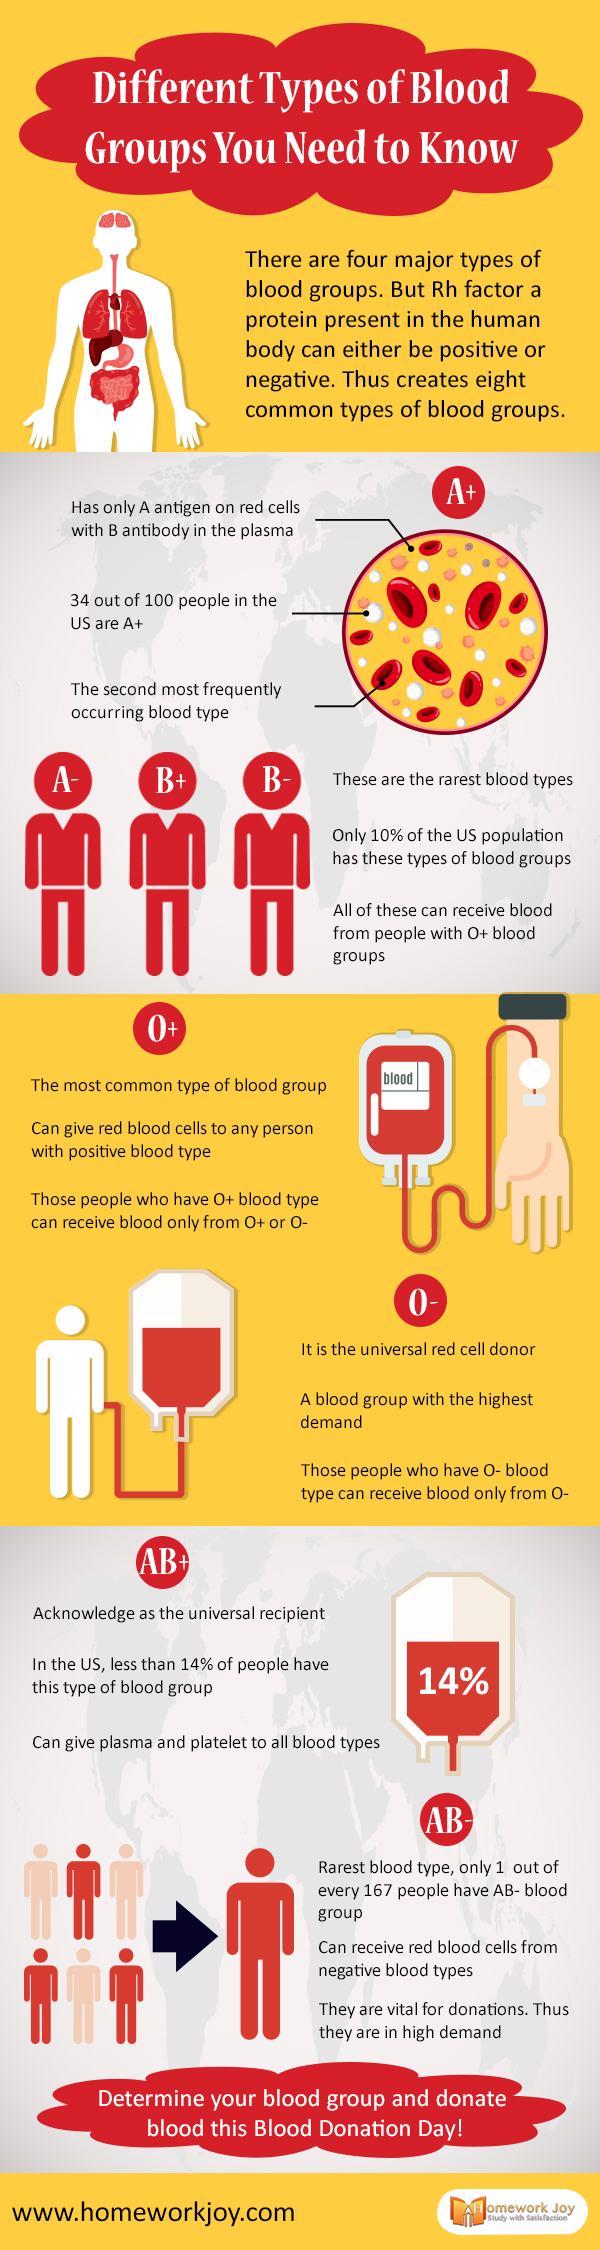 Different Types of Blood Groups You Need to Know